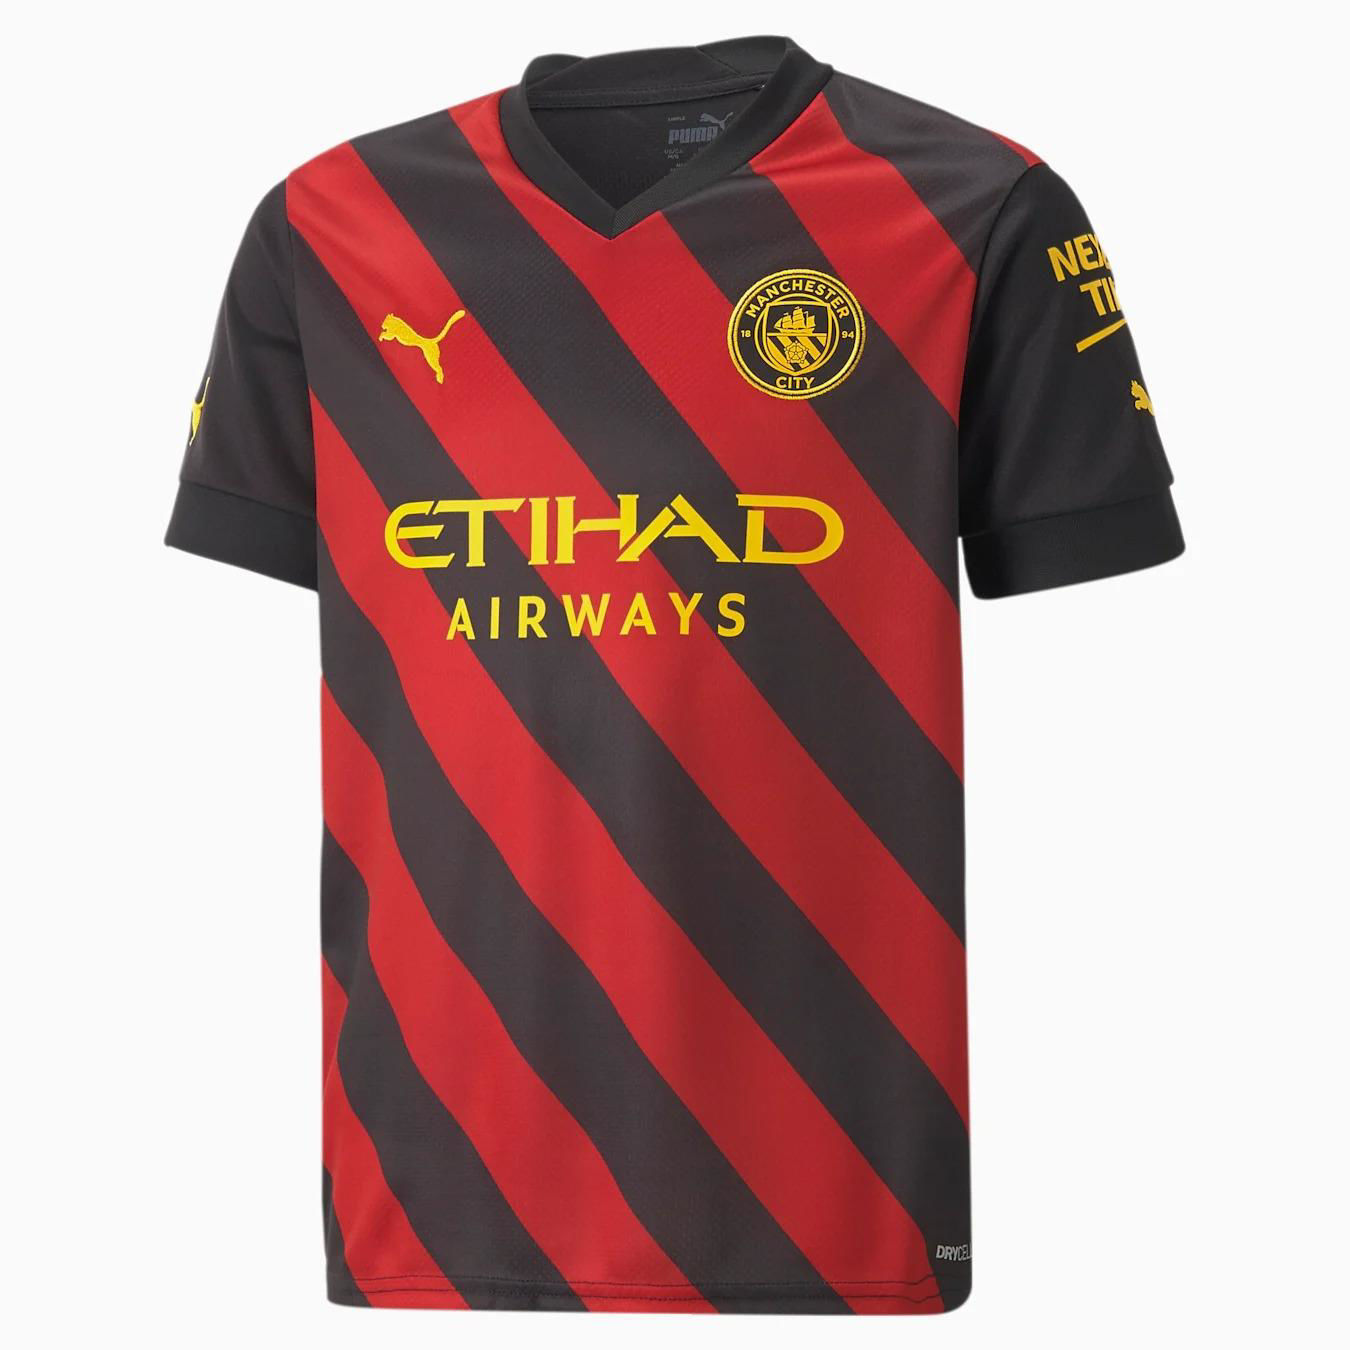 Picture of MCFC AWAY JERSEY REPLICA JR  152 (M) Black/red